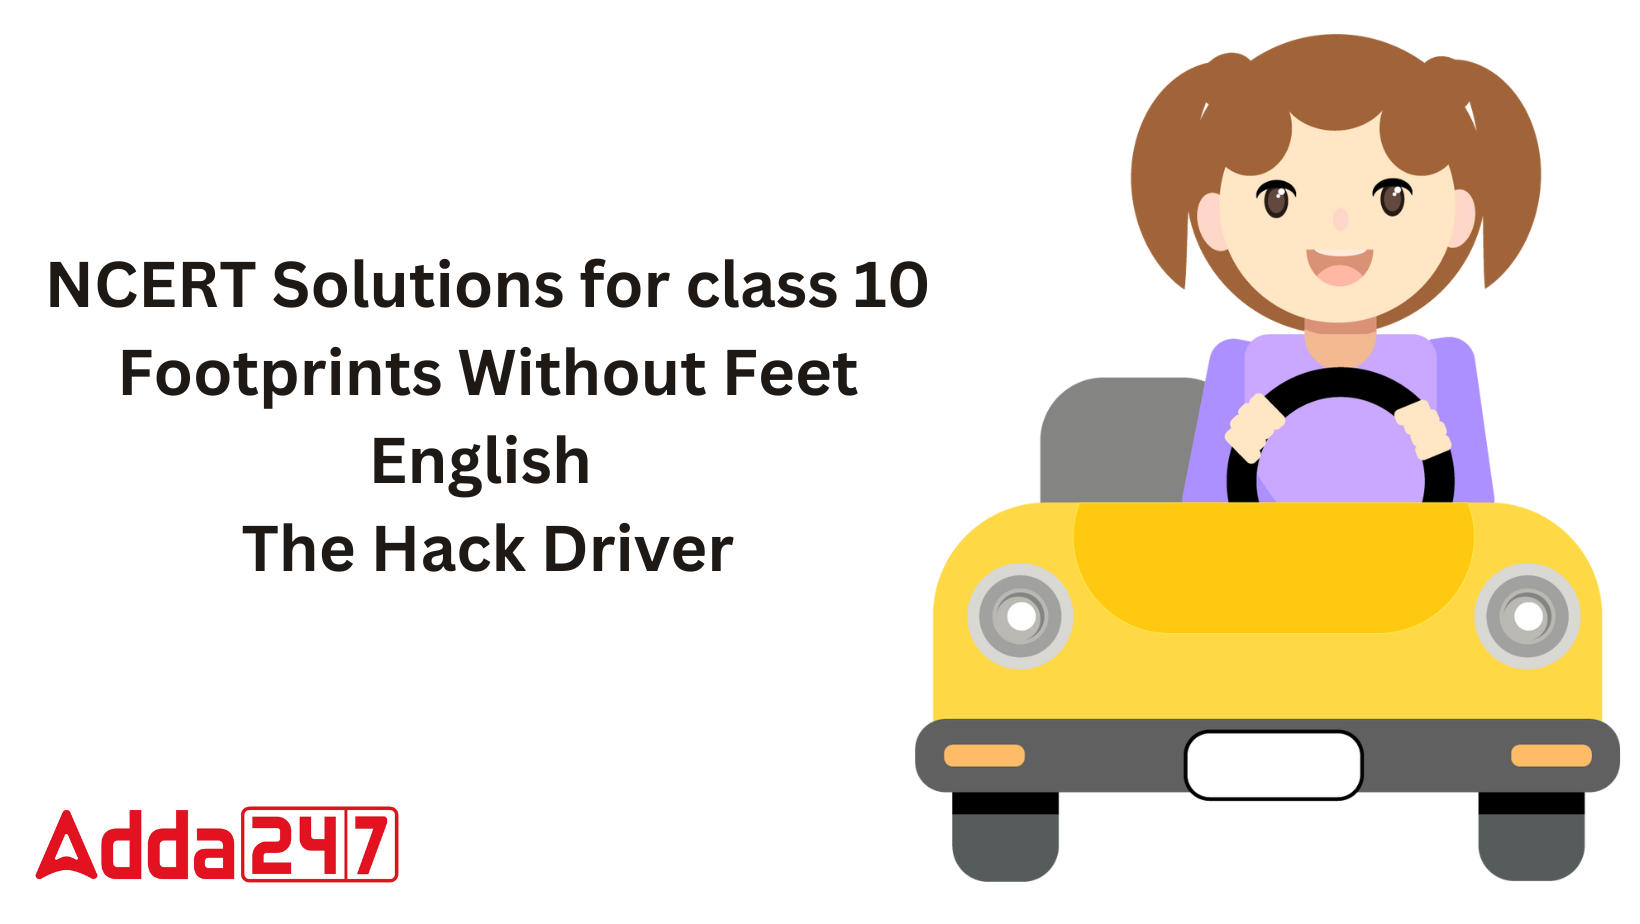 NCERT Solutions for class 10 Footprints Without Feet English The Hack Driver